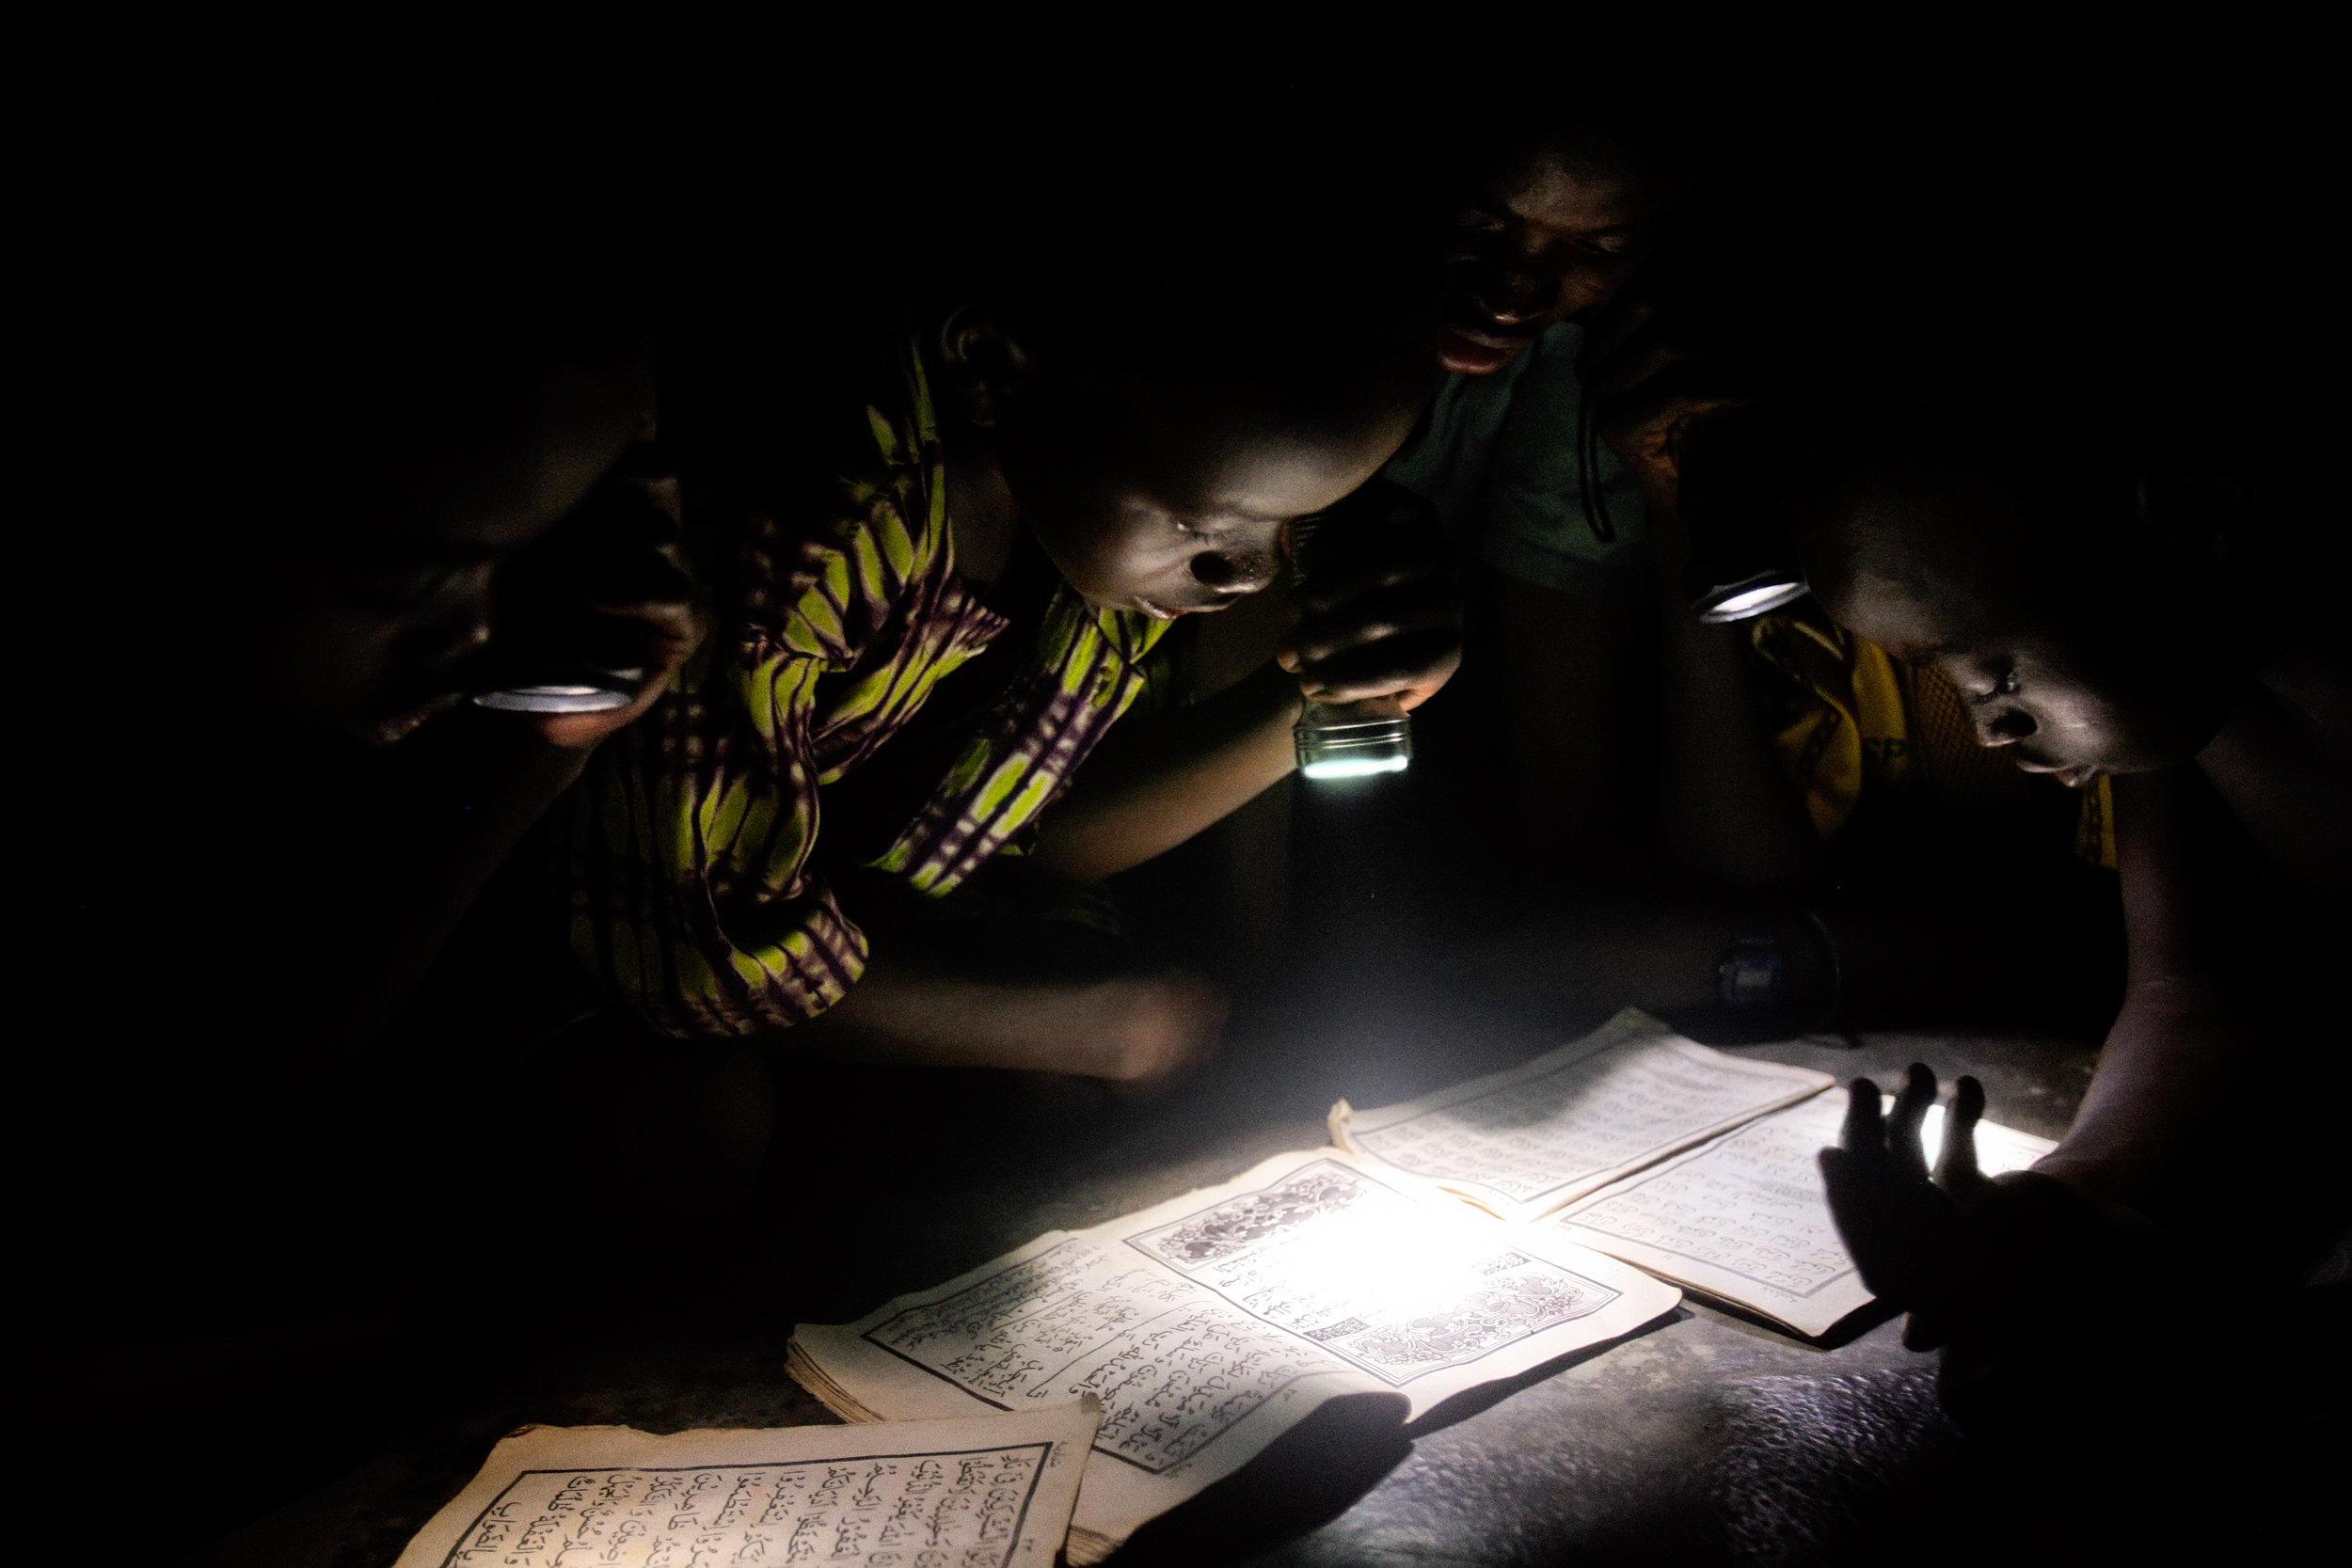  Children read the Koran by flashlight at a mosque in Wantugu, Northern Region, Ghana on May 13, 2007. Wantugu had power lines installed in 2000, but government officials failed to connect them to a power source. 